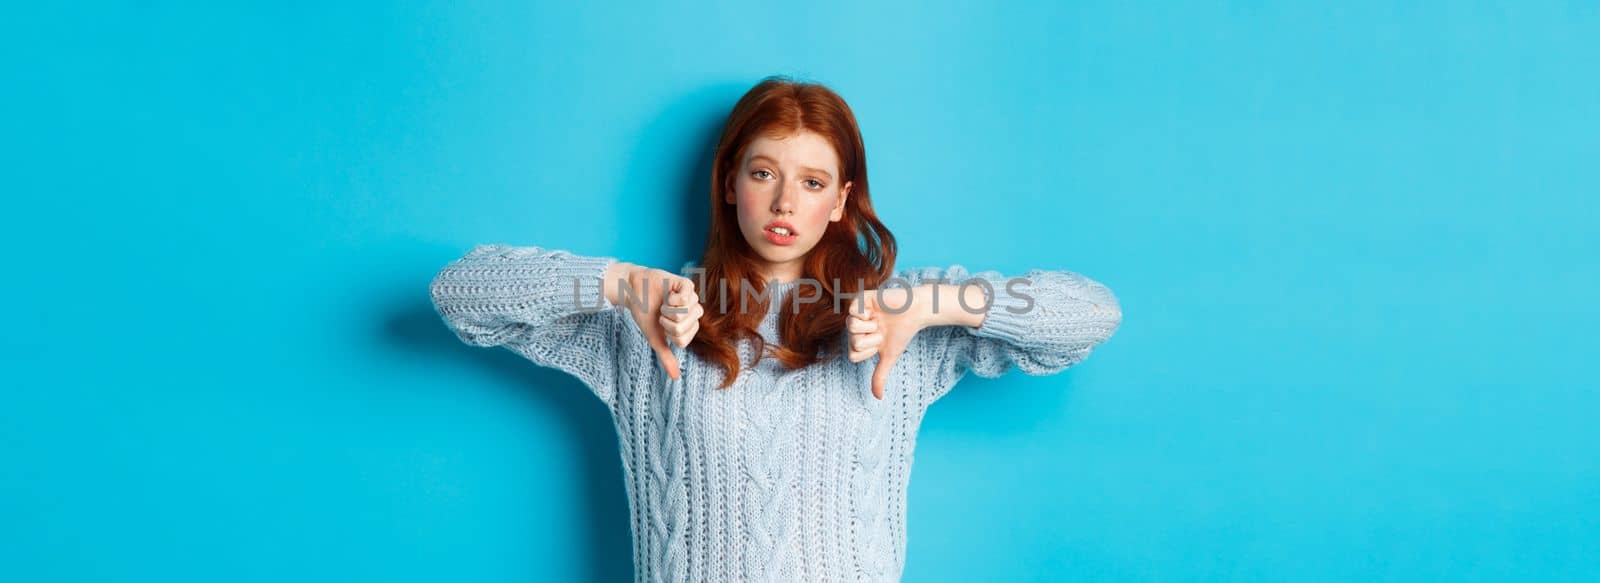 Bored and skeptical redhead girl showing thumbs down, looking unamused and uninterested, standing over blue background.